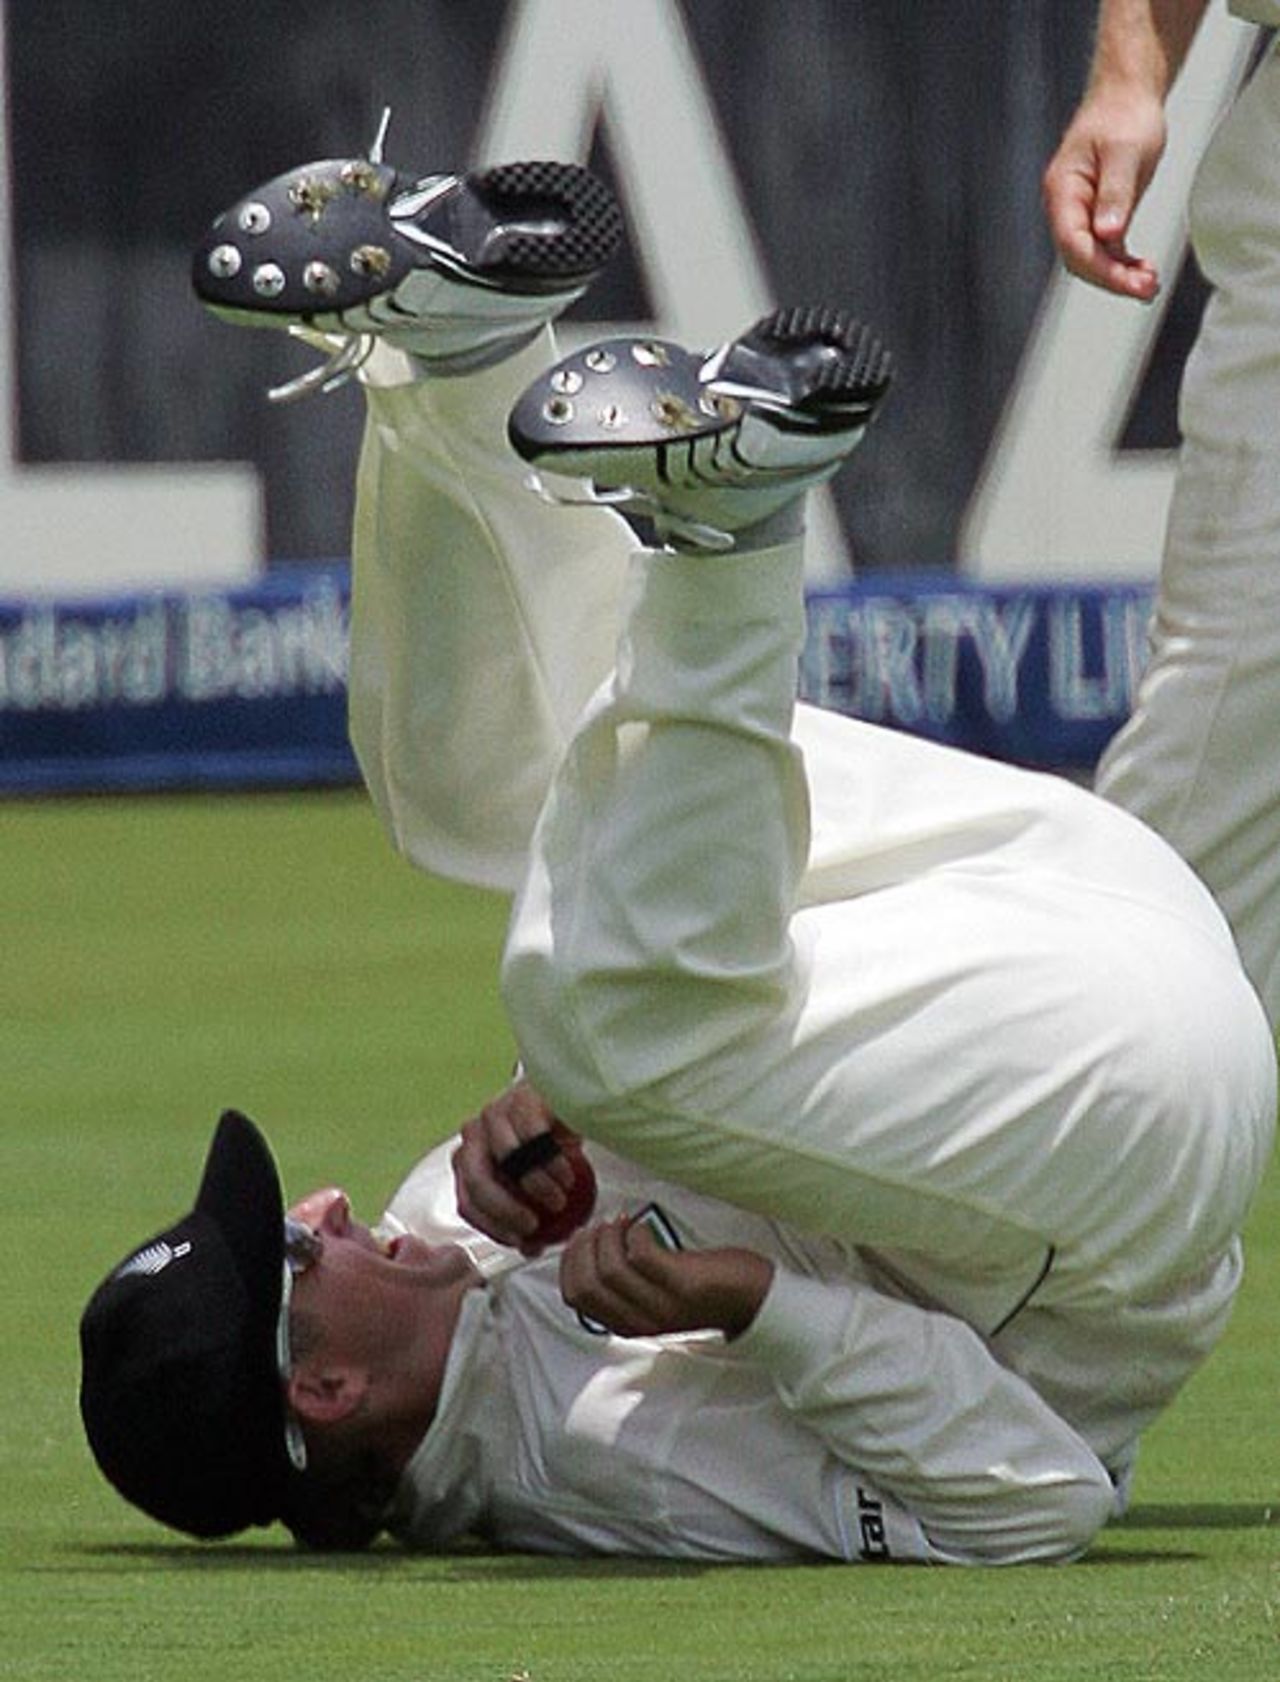 Michael Papps holds on to the catch to dismiss Dale Steyn, South Africa v New Zealand, 2nd Test, Centurion, 3rd day, November 18, 2007